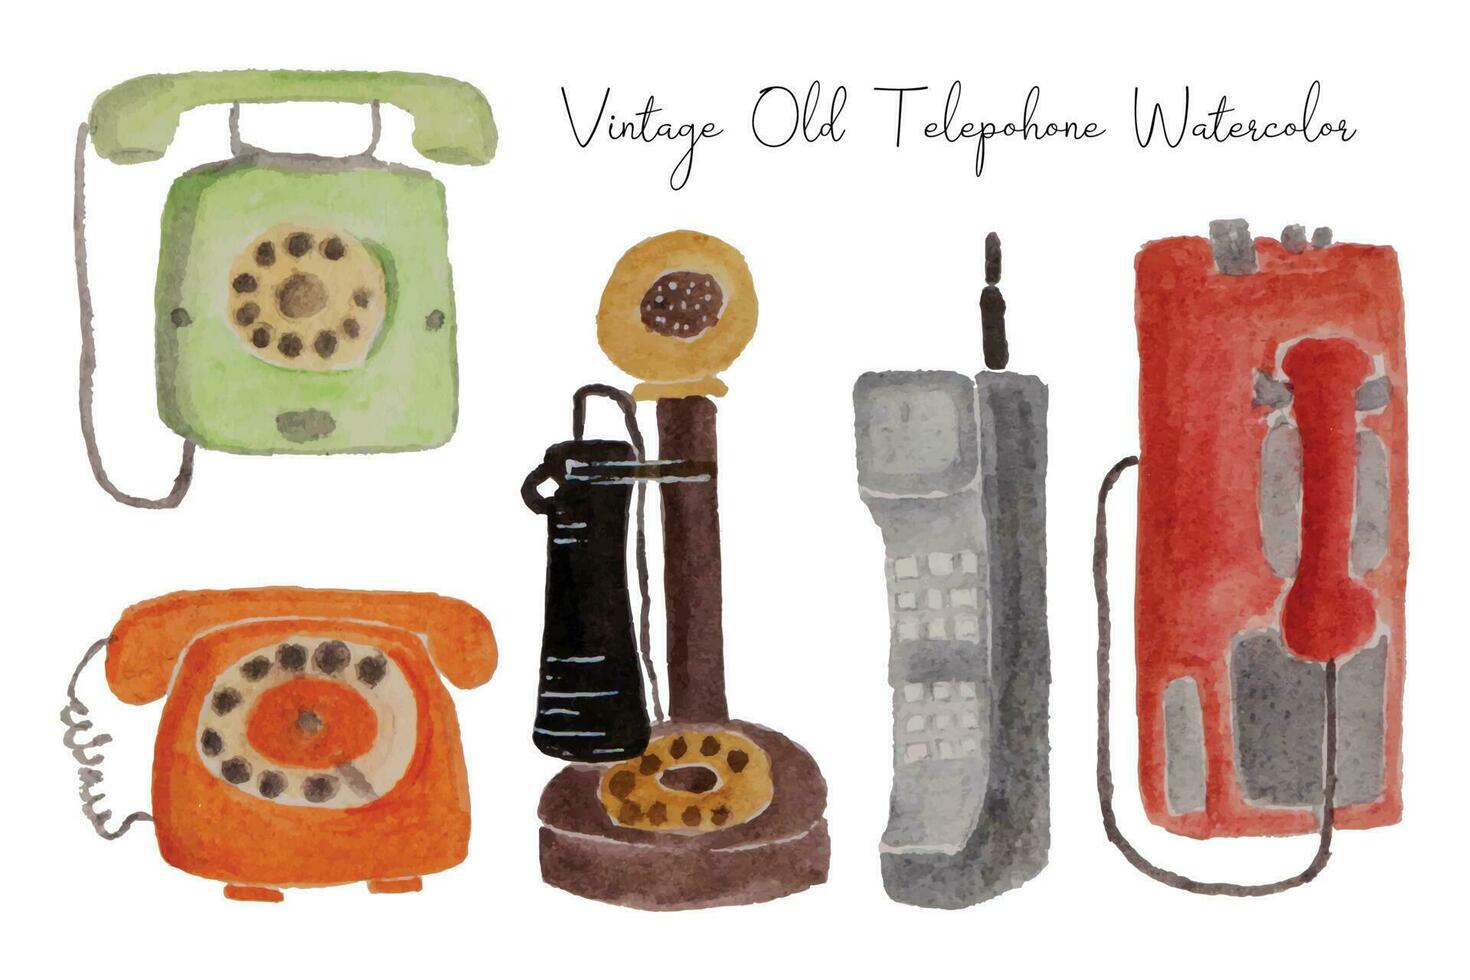 Vintage Old Telephone Watercolor Illustration vector